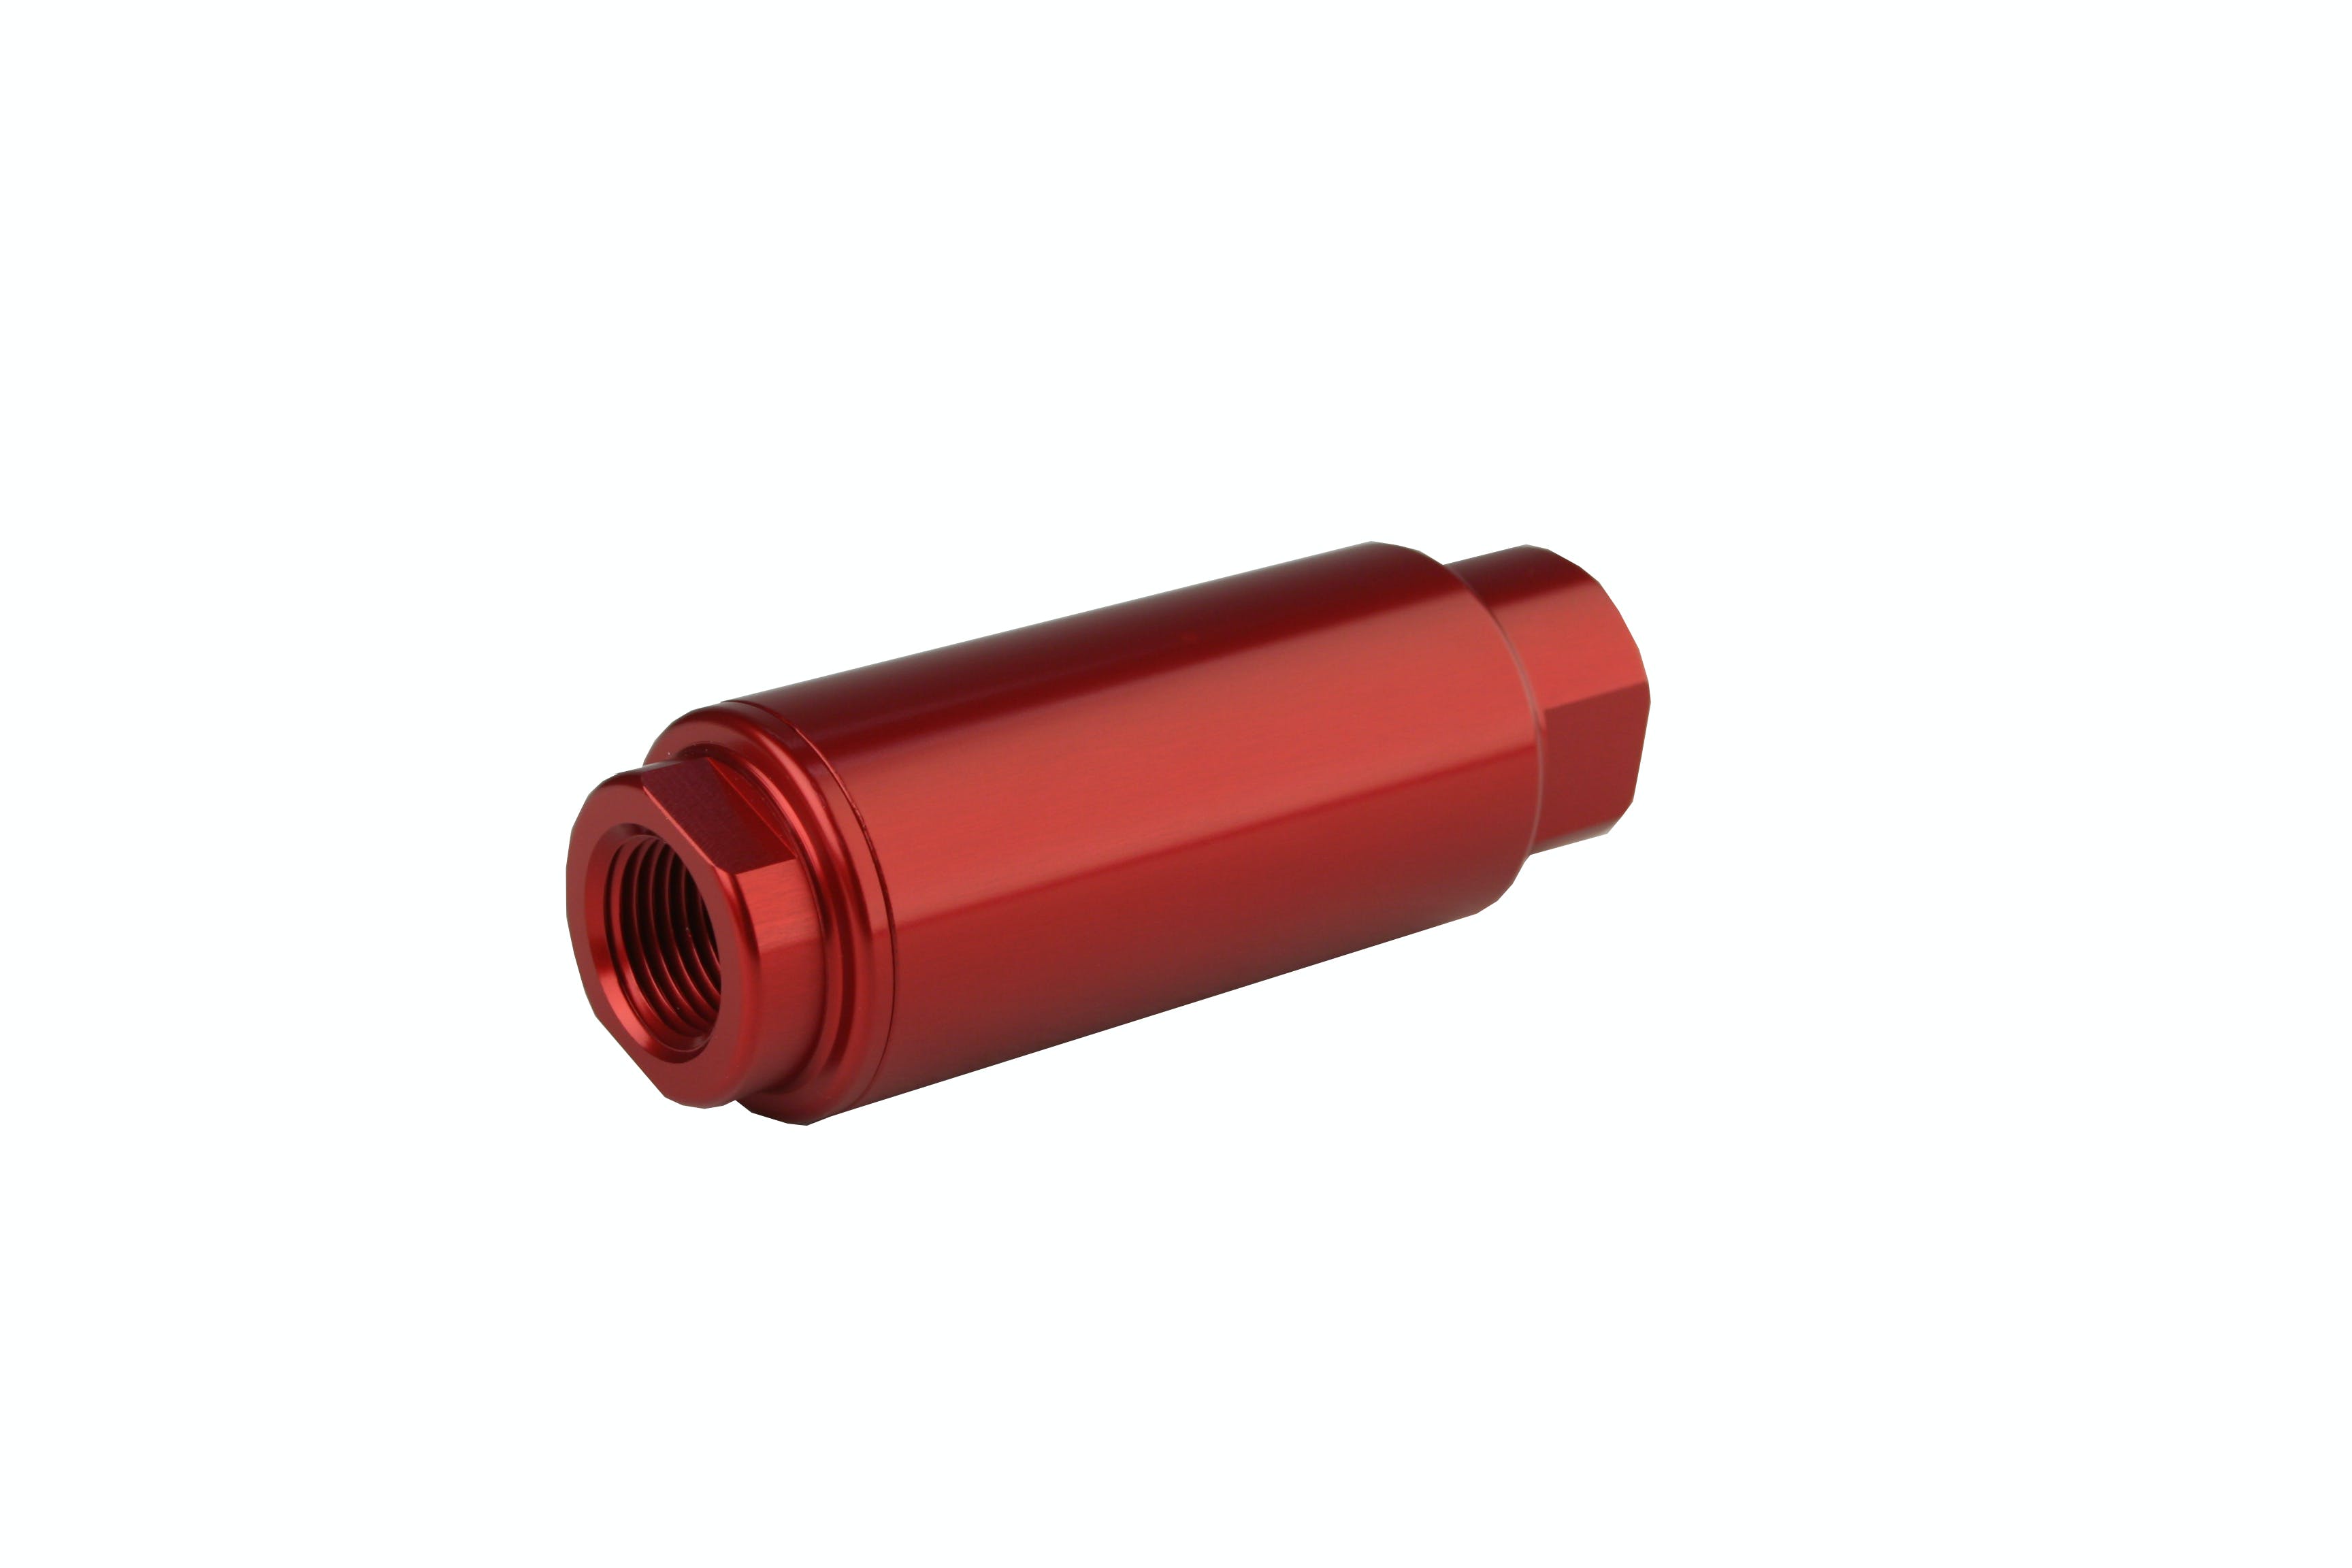 Aeromotive Fuel System 12303 SS Series In-Line Fuel Filter (3/8 inch NPT) 40 micron fabric element